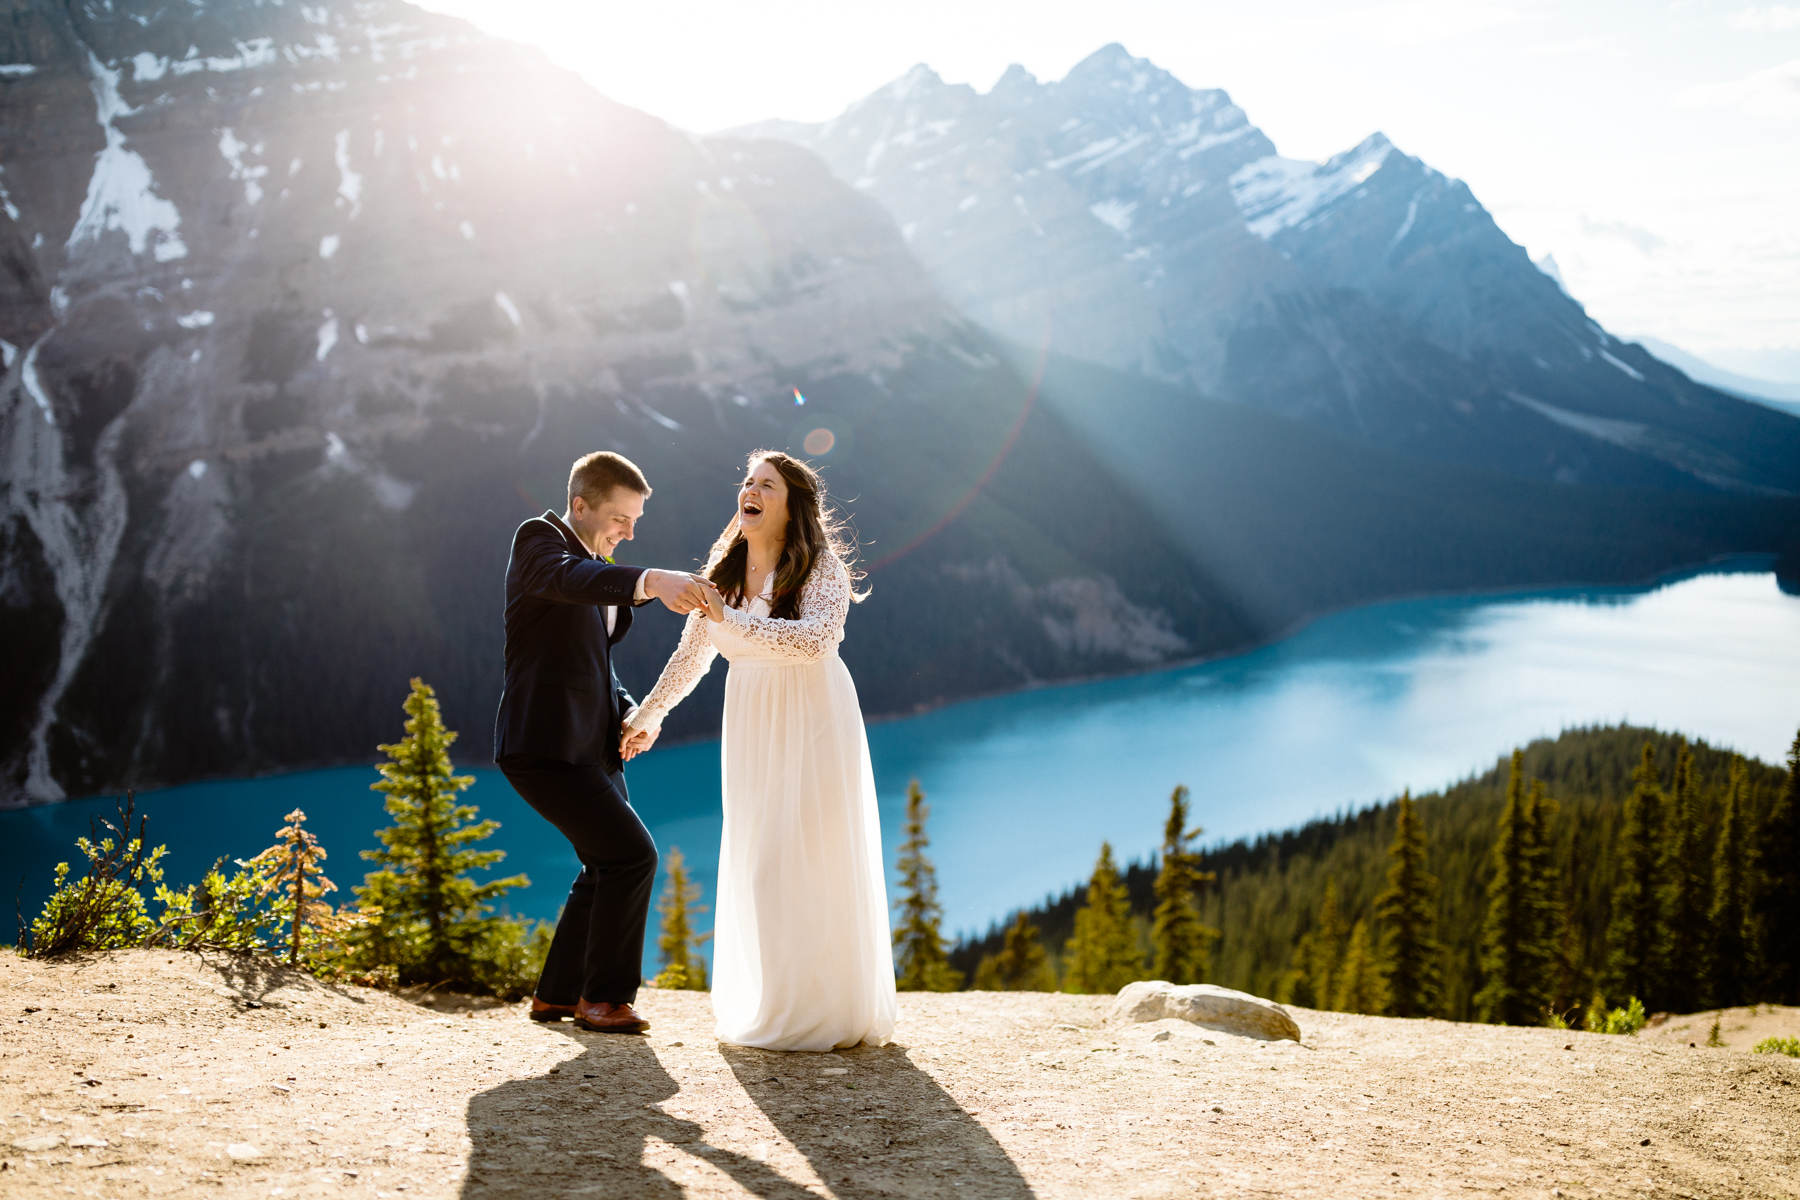 Vow Renewal Photography in Banff - Image 18